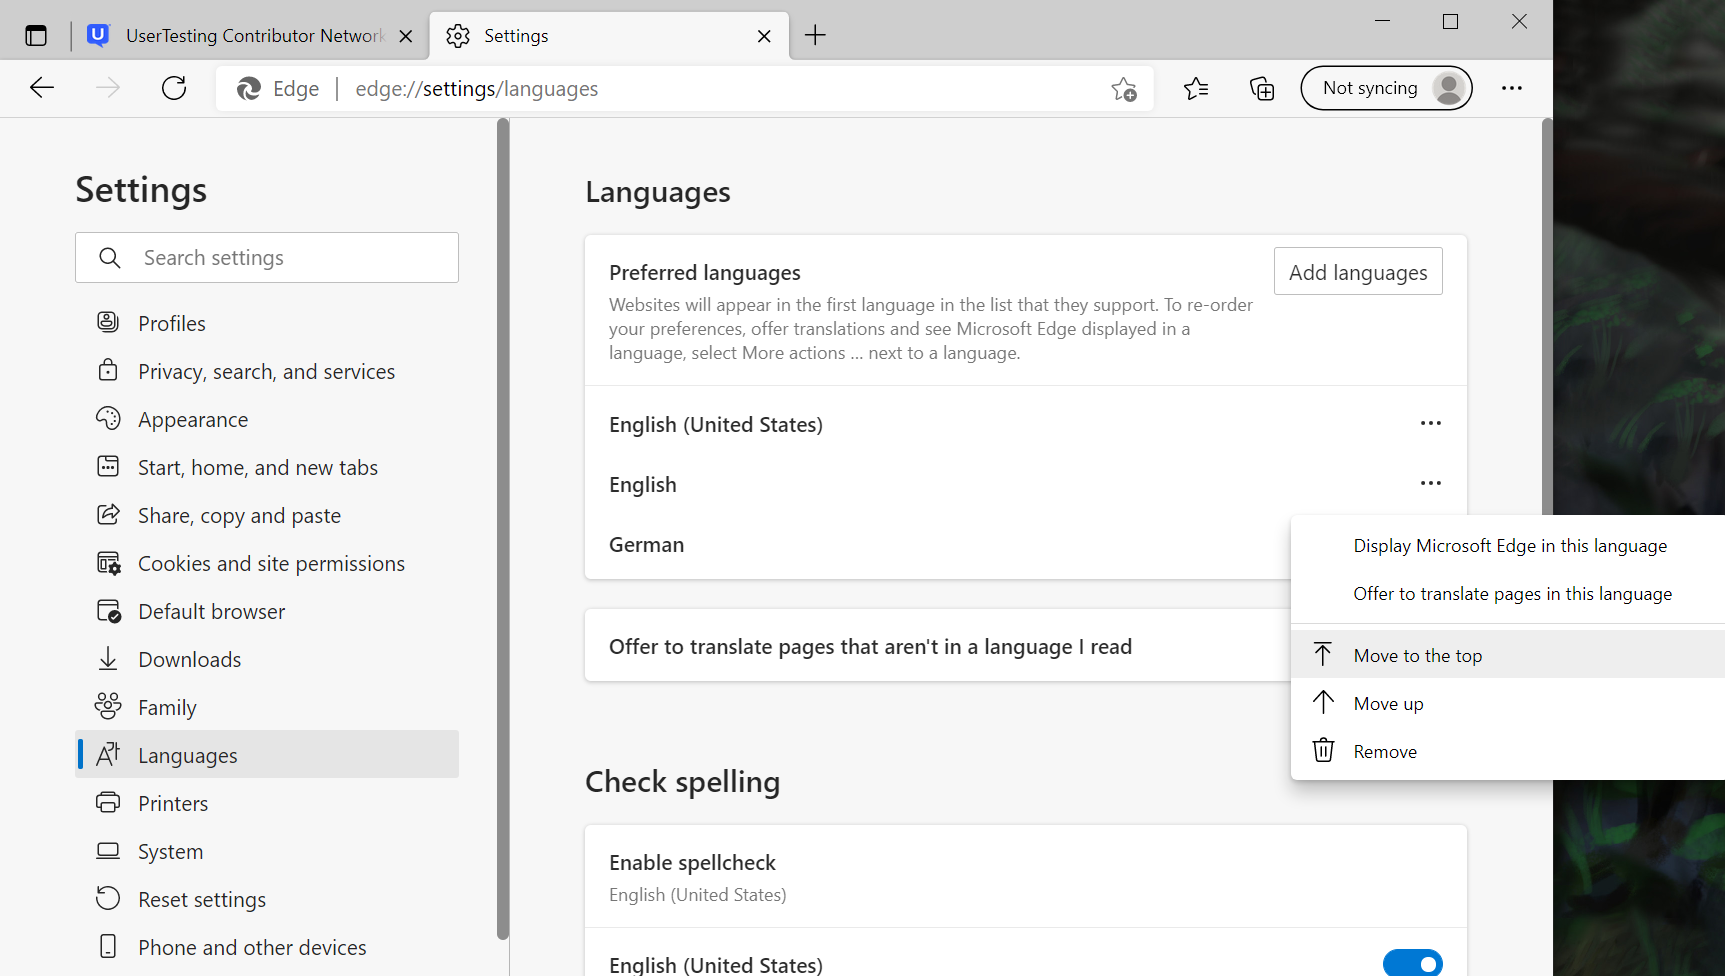 A screenshot of the Microsoft Edge Language settings. The option Move to the top is selected for one of the listed languages.